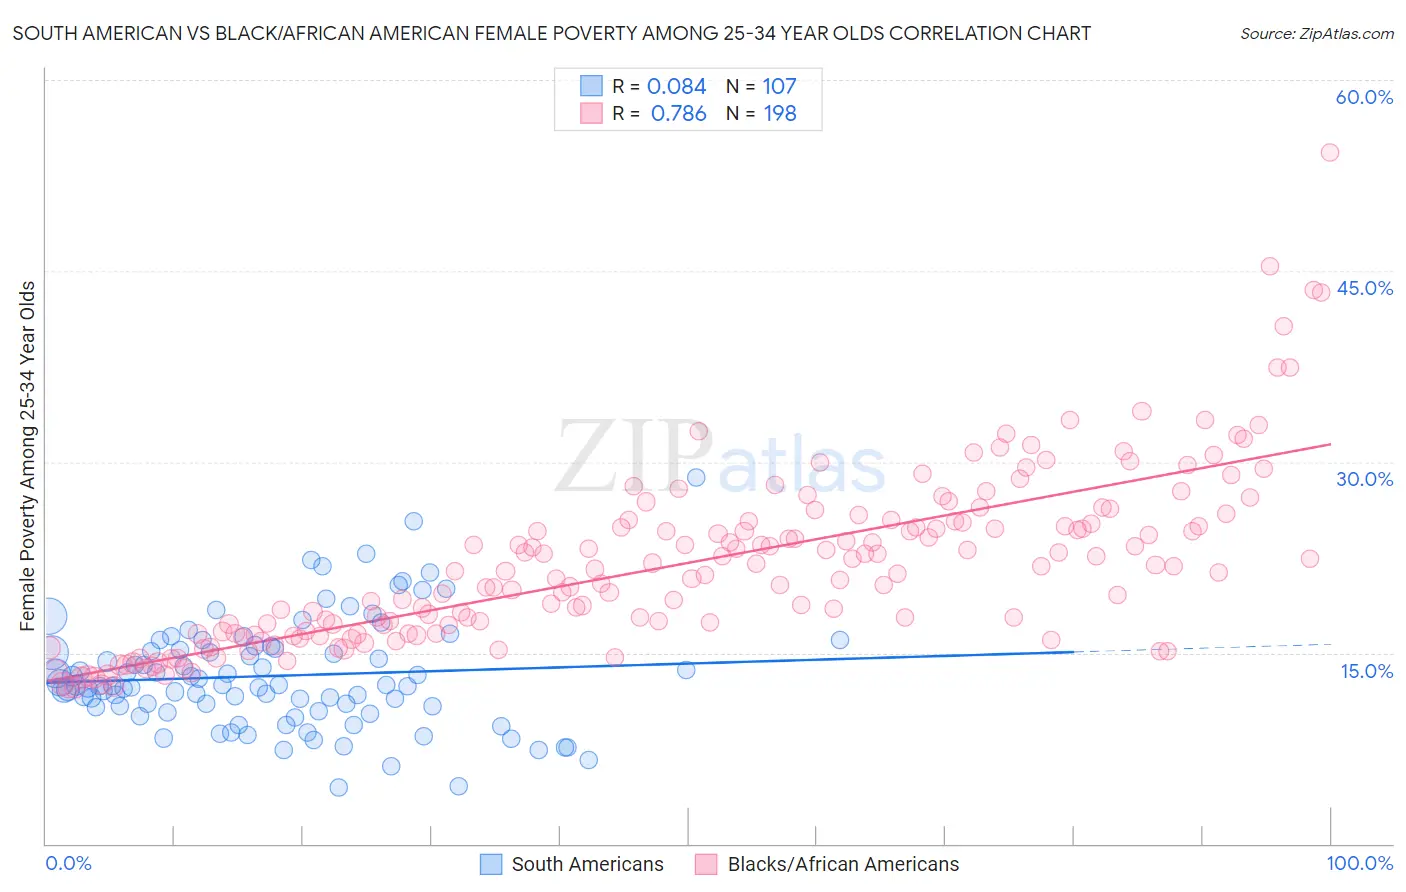 South American vs Black/African American Female Poverty Among 25-34 Year Olds